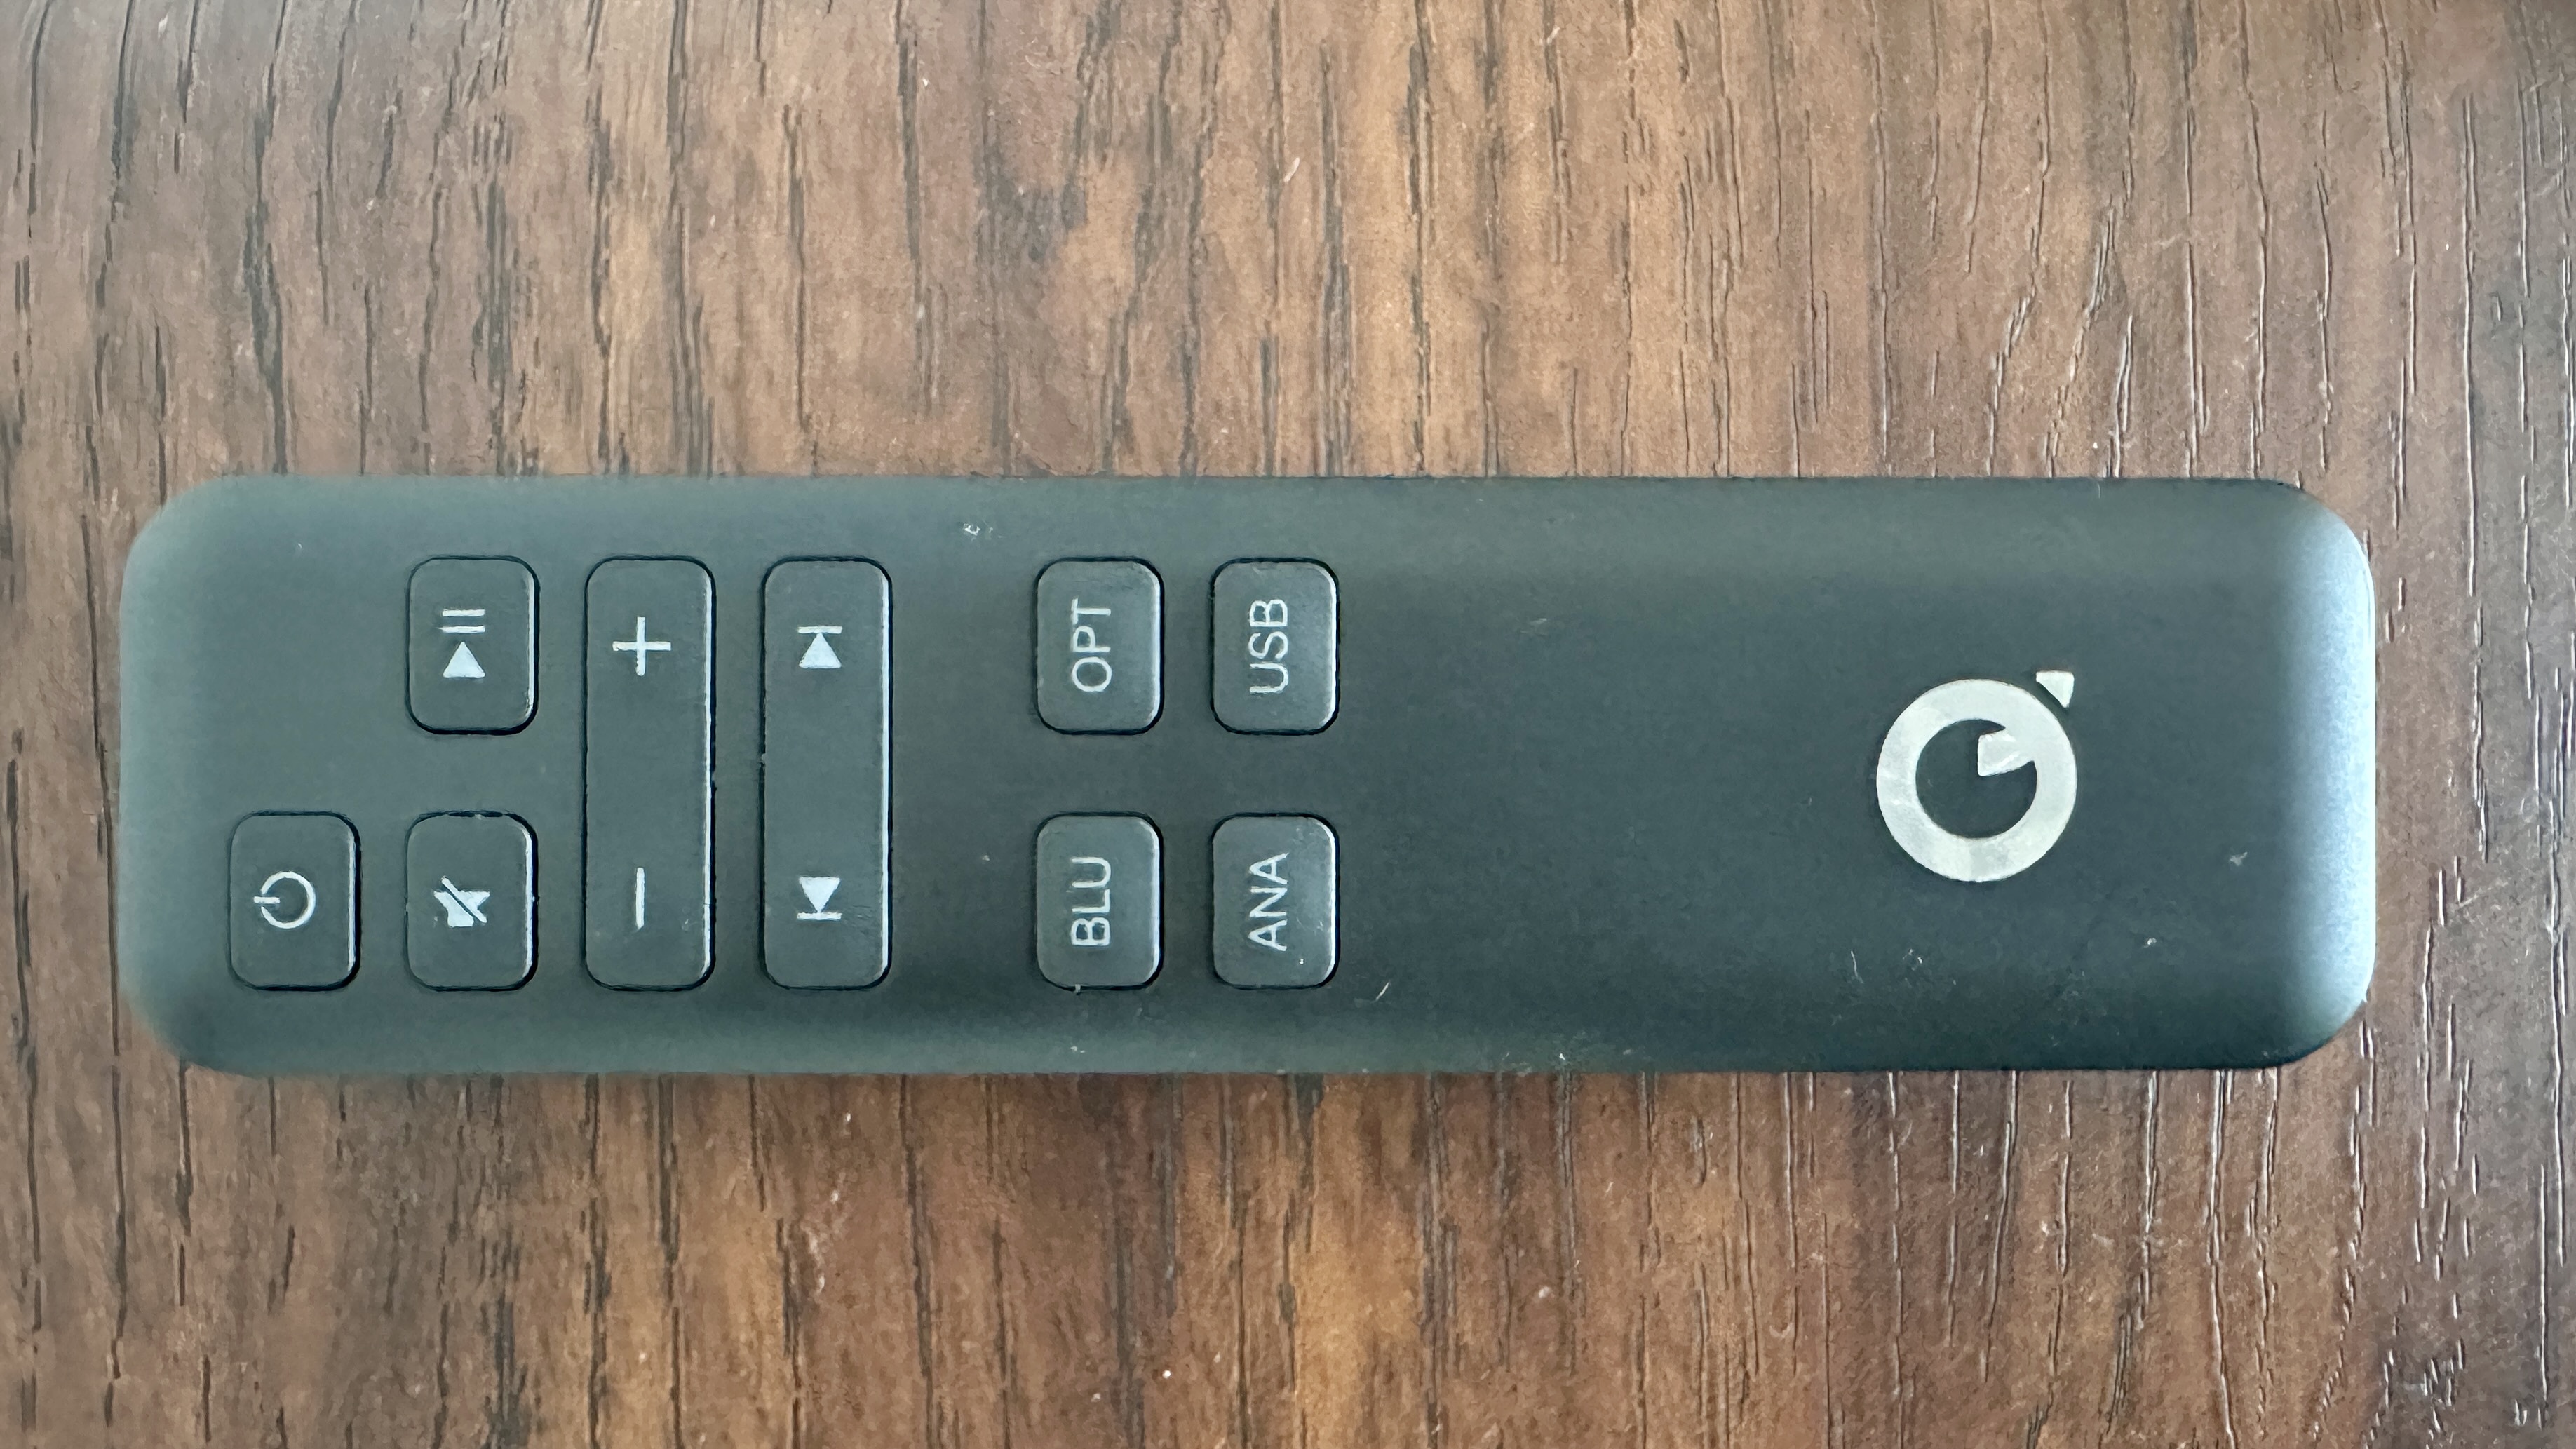 Q Acoustics' M40 HD remote control on top of the unit